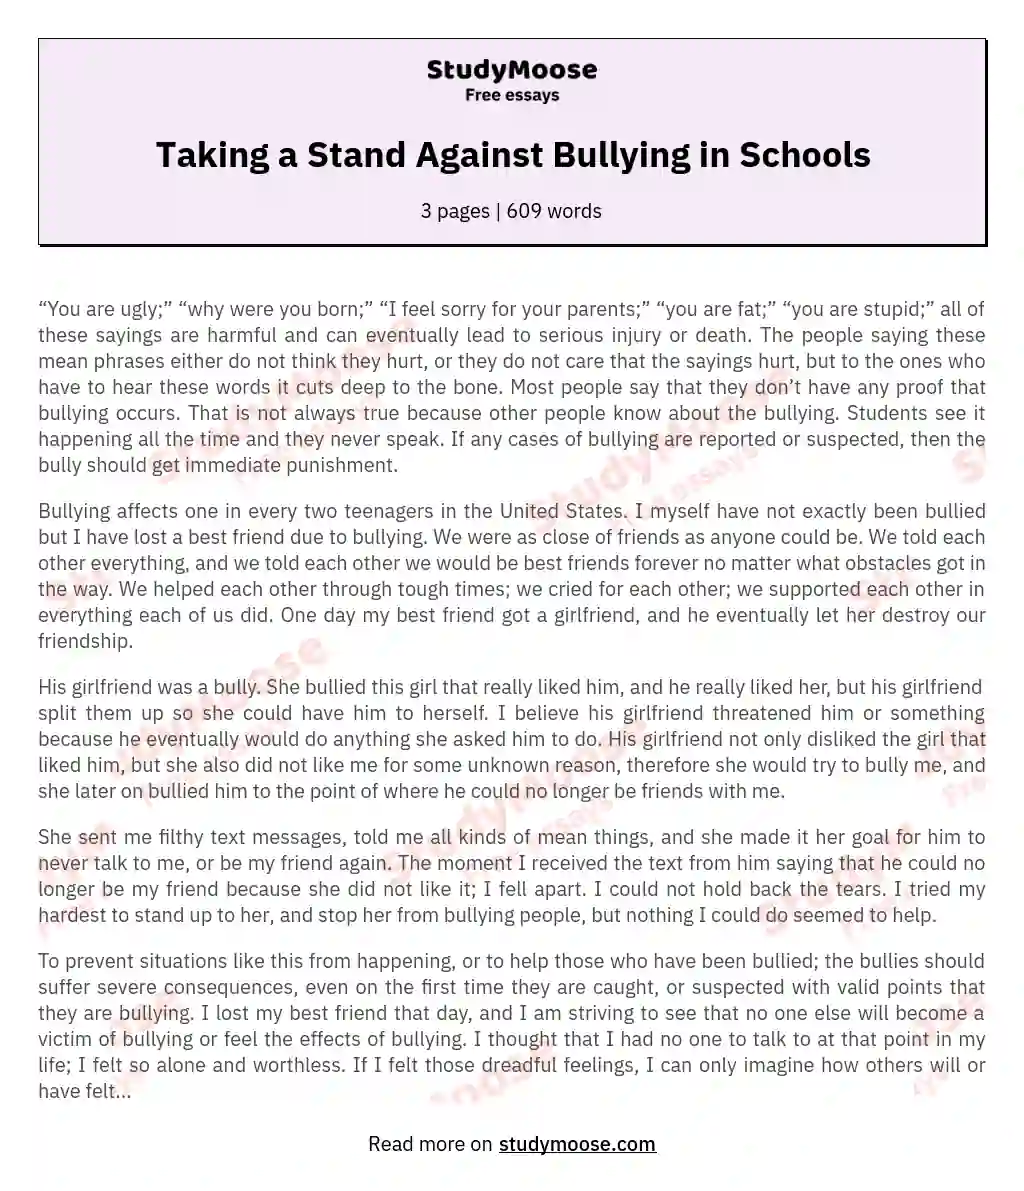 Taking a Stand Against Bullying in Schools essay